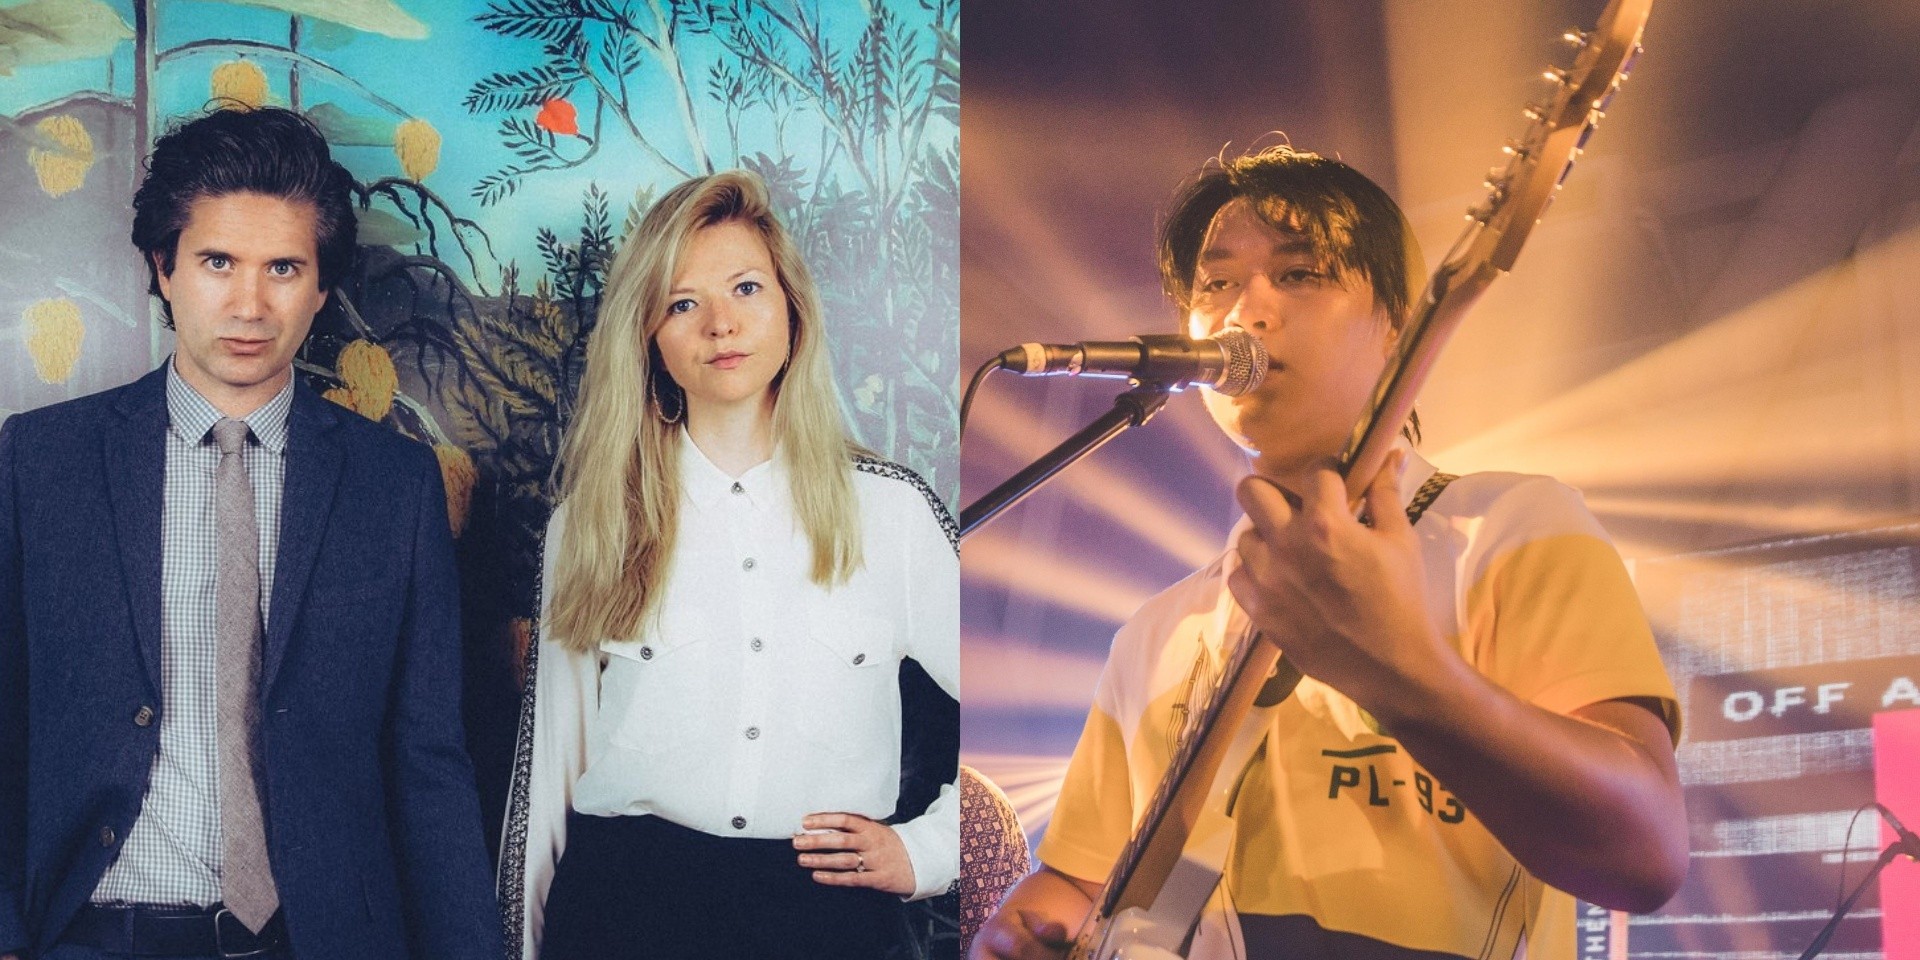 Still Corners and Mellow Fellow to perform in Singapore